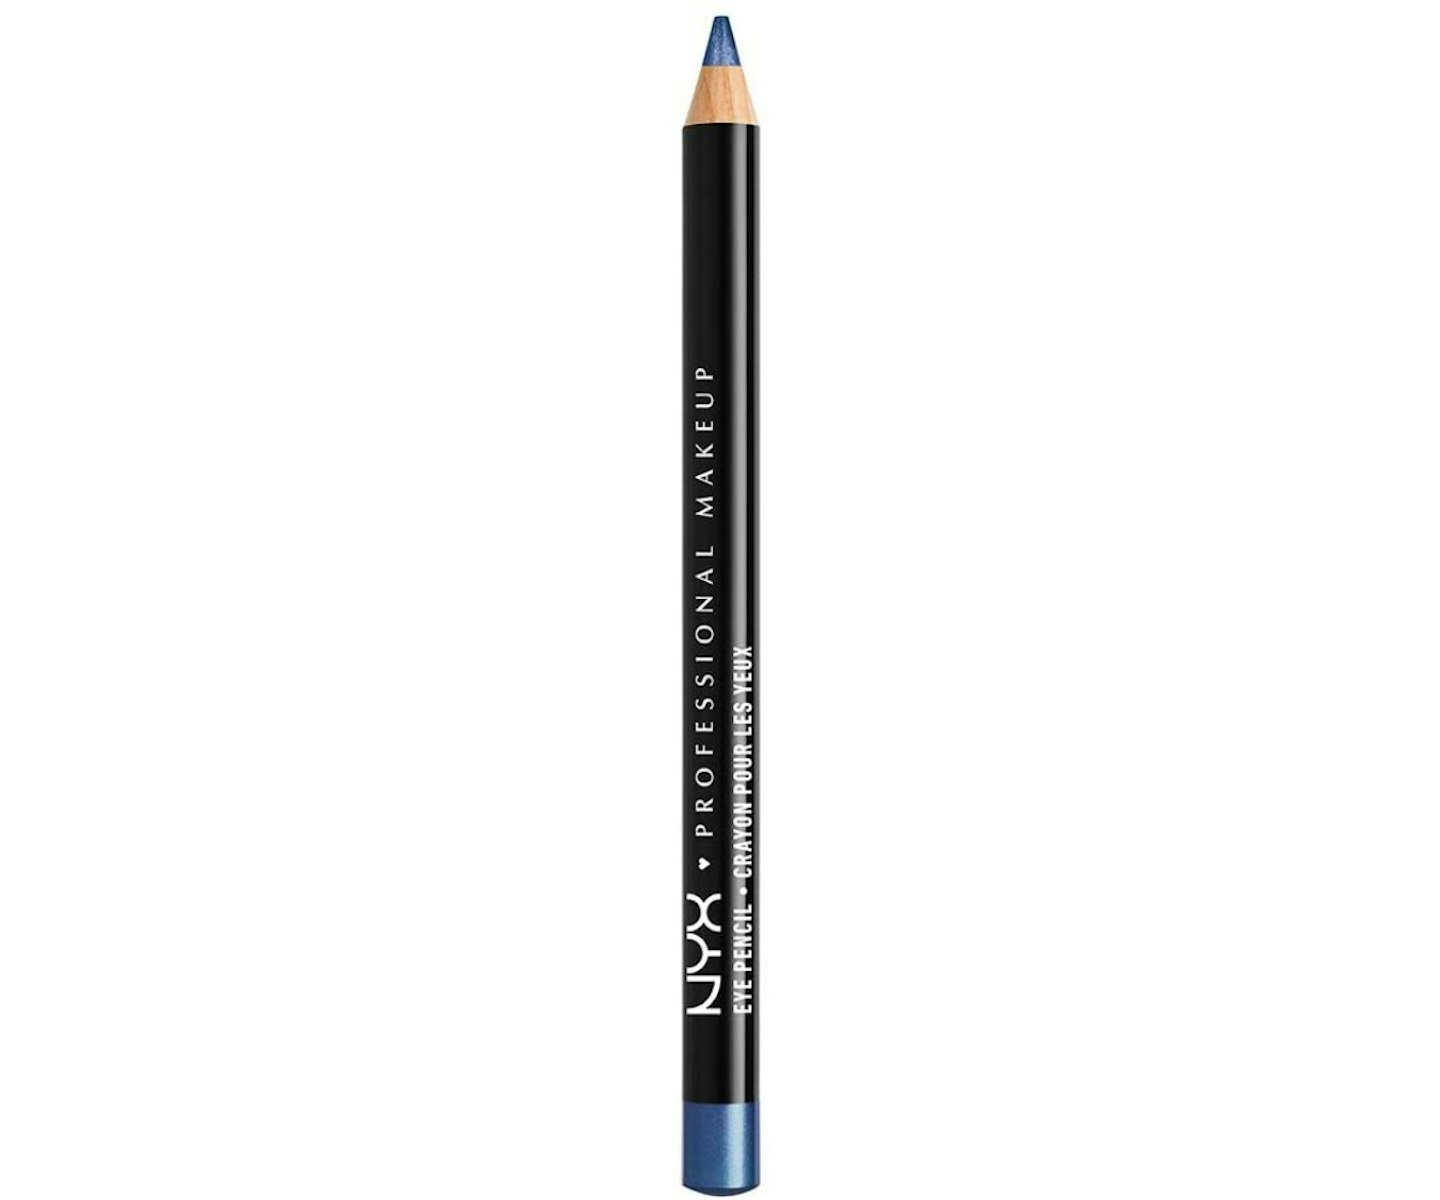 A picture of the NYX Slim Eye Pencil in the shade Sapphire